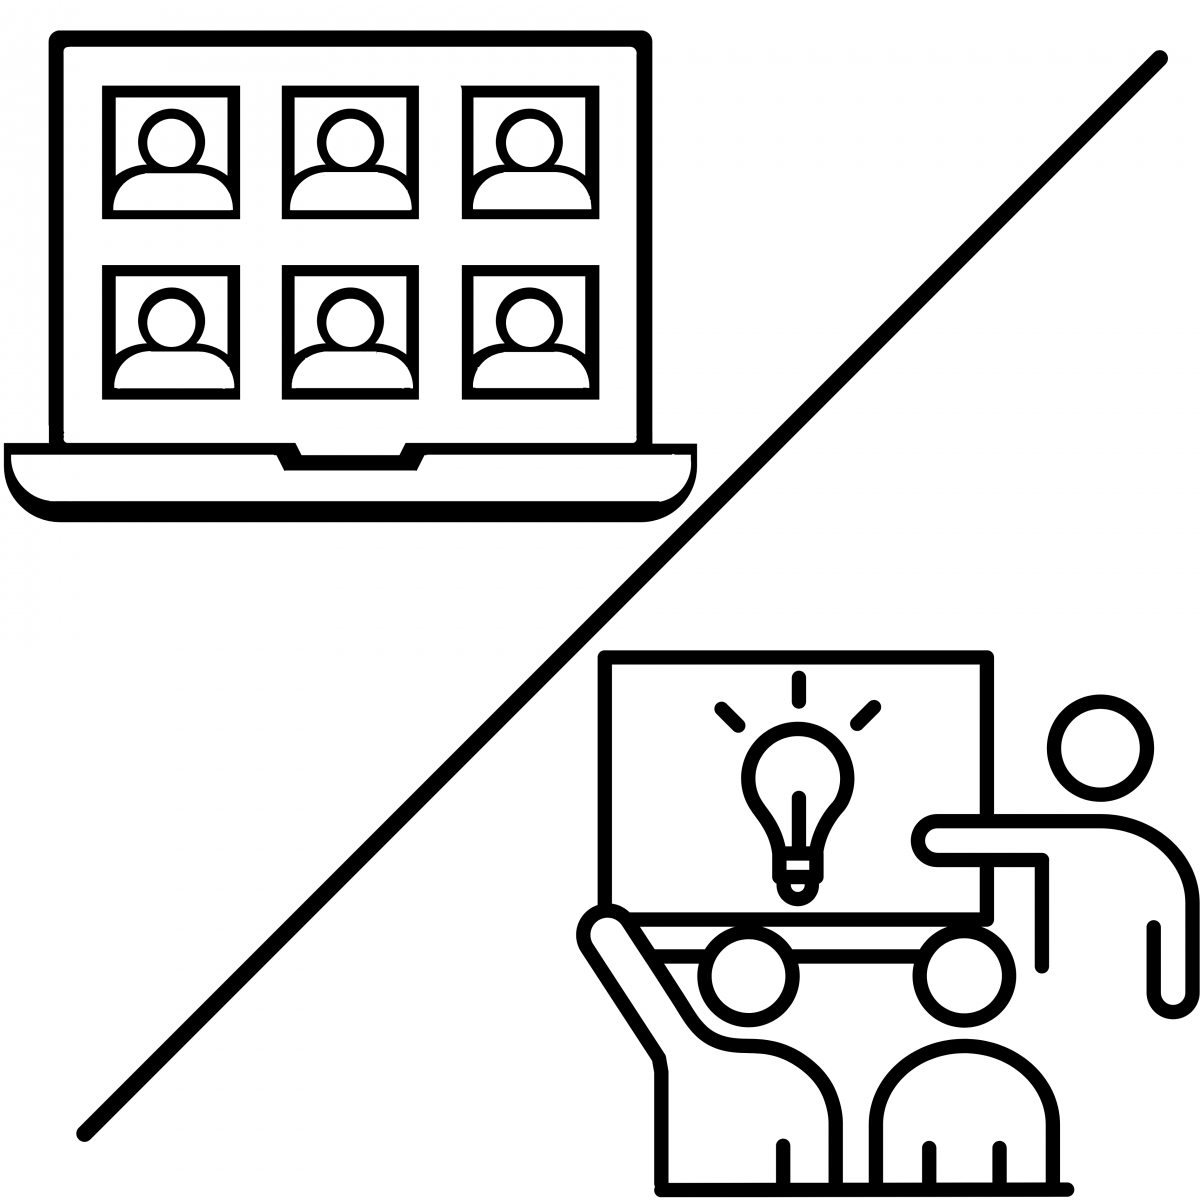 Two images divided by a diagonal divider. Six icons of people on a computer screen in the top left corner. On the right bottom corner there is a lightbulb symbol on a screen with three people gathered around pointing at the screen.